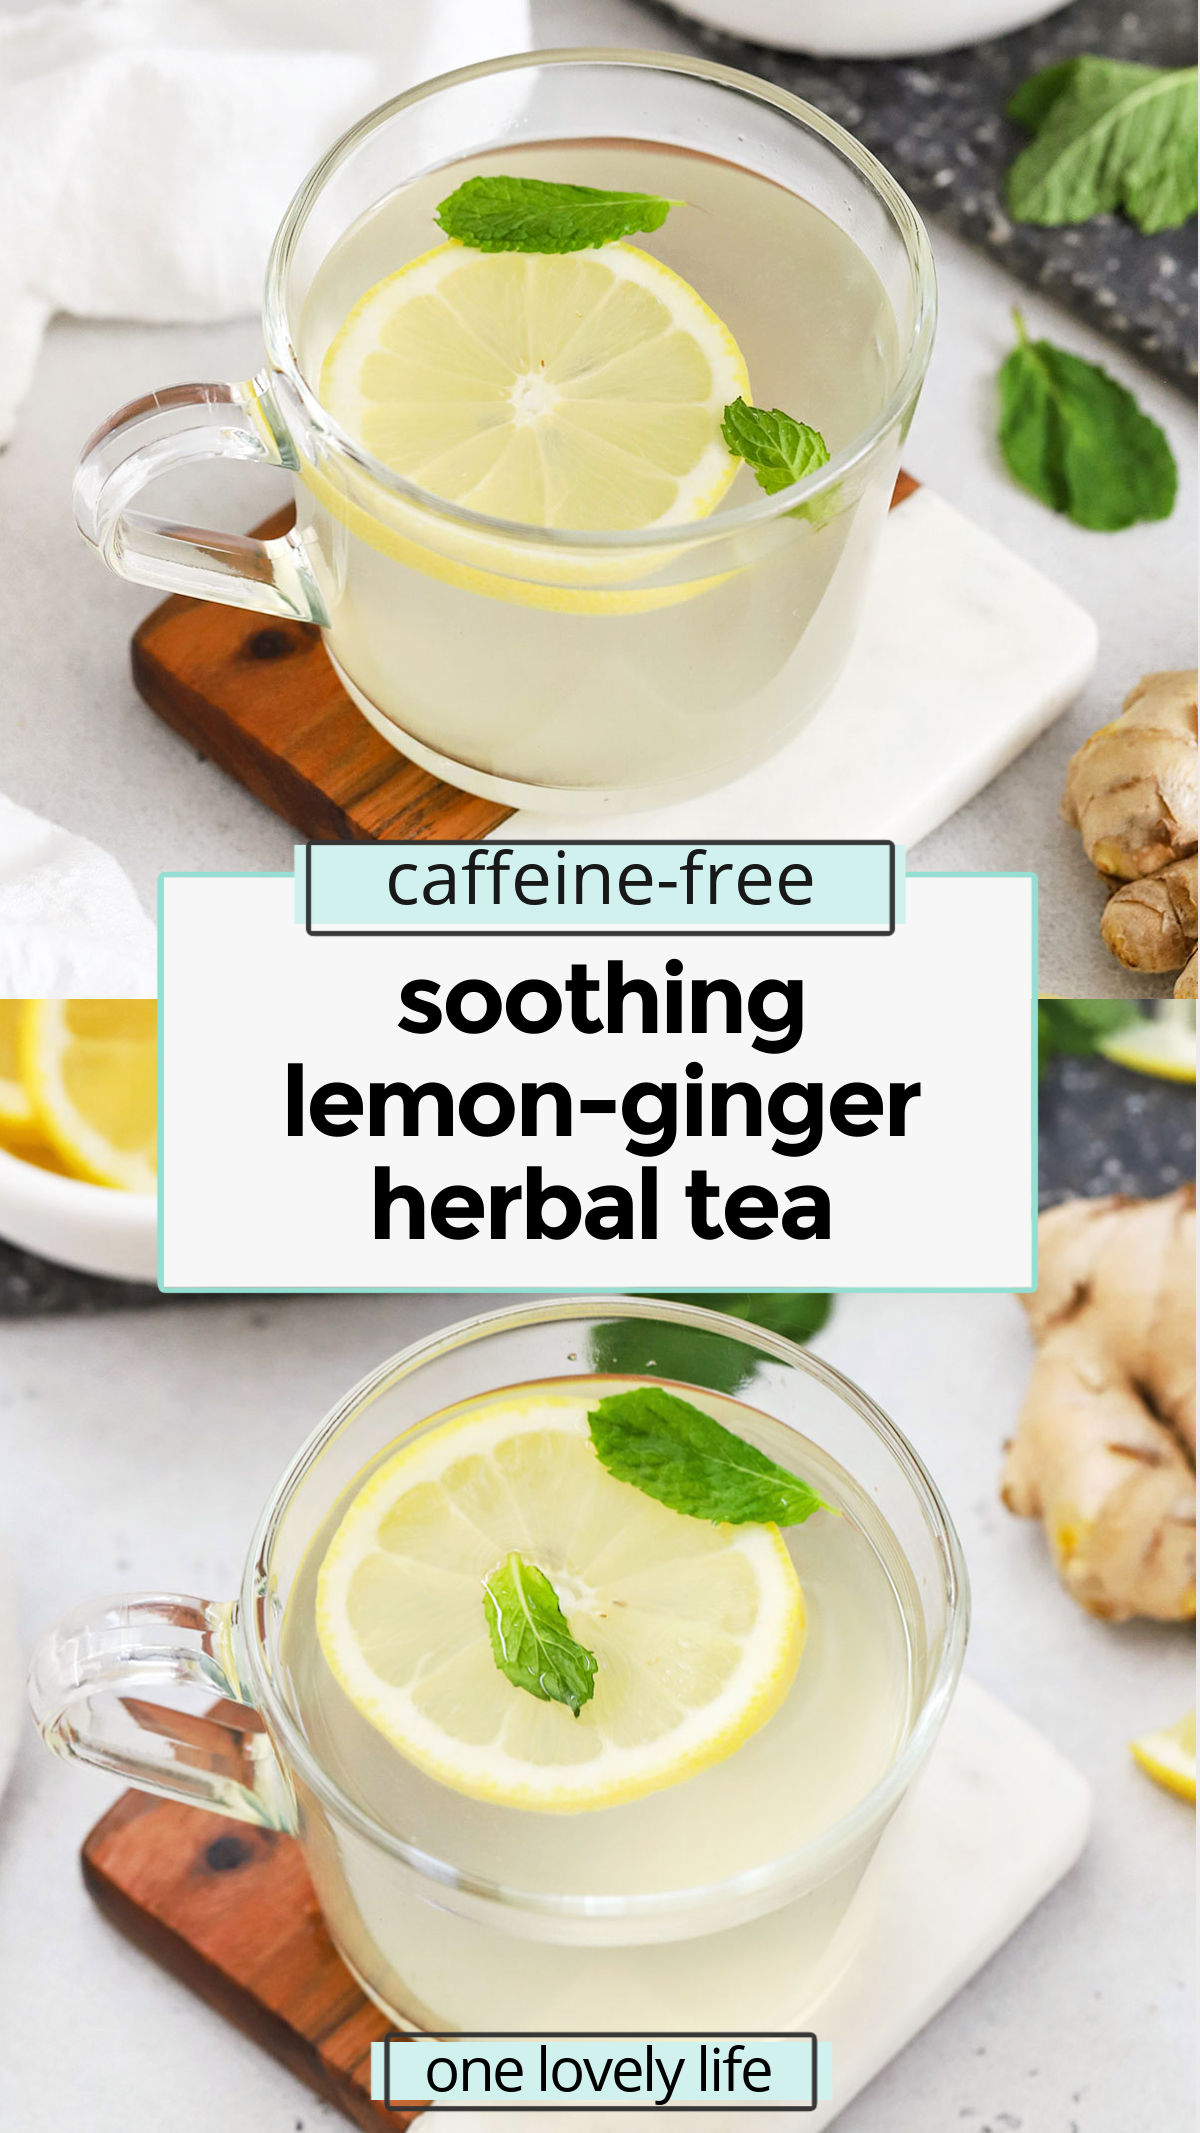 This lemon ginger tea recipe is so cozy when the weather turns cold. You'll love the bright citrus and warm spice from the ginger! / fresh ginger tea recipe / lemon ginger herbal tea / DIY herbal tea / ginger lemon tea recipe / warm drinks / healthy drinks / healthy hot drinks / healthy drink recipe / homemade ginger lemon tea / homemade ginger tea / fresh lemon ginger tea